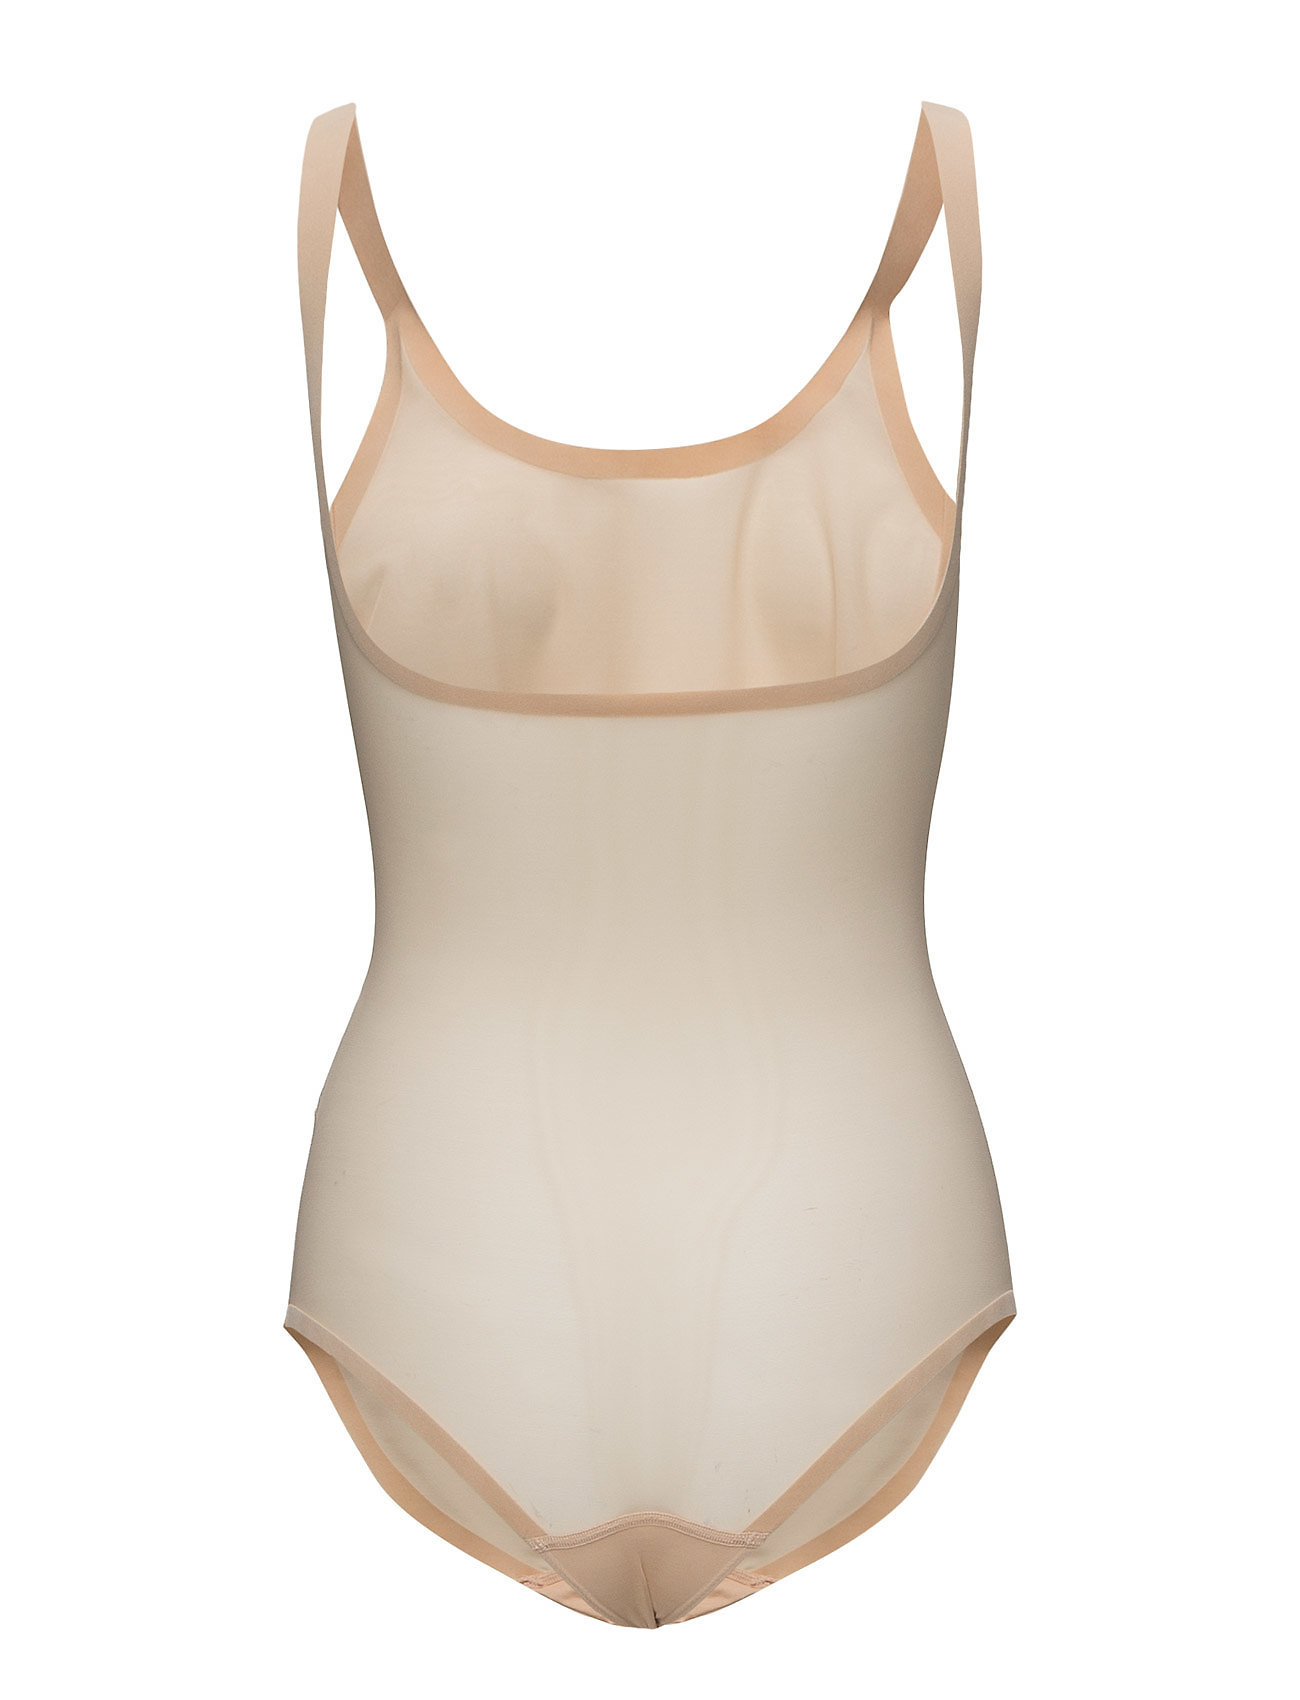 Tulle Forming Body Lingerie Shapewear Bottoms Beige Wolford